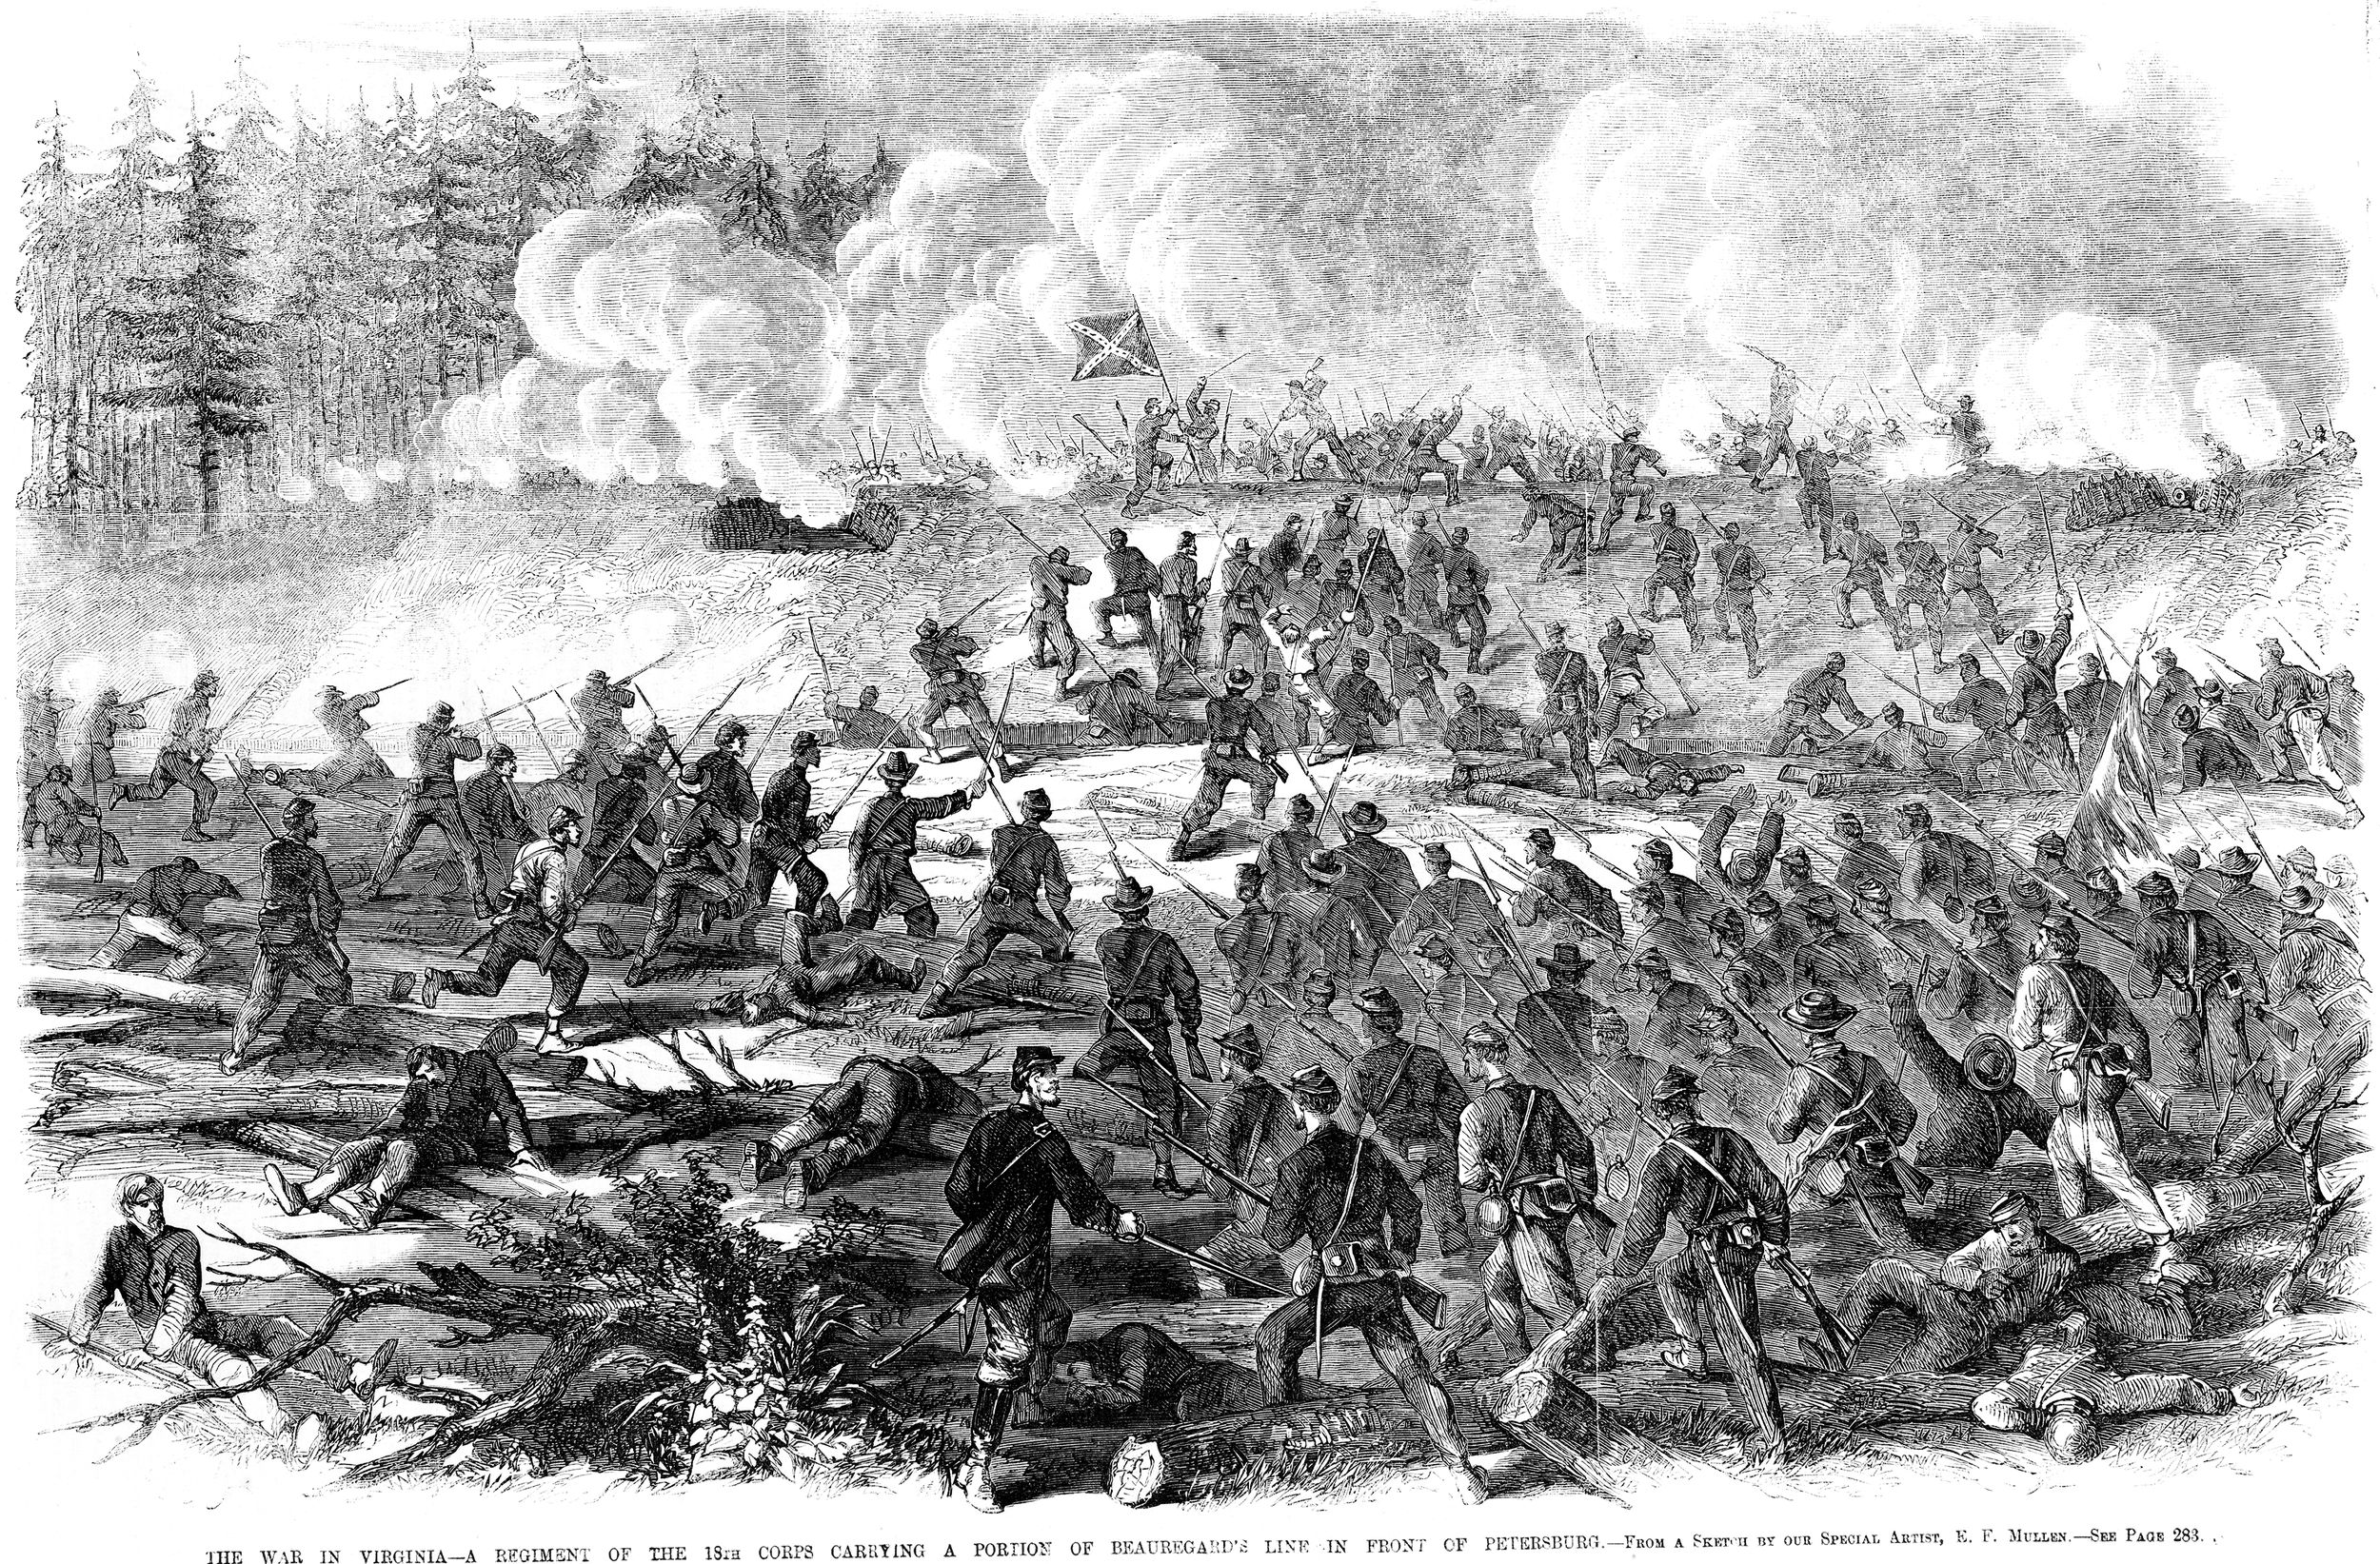 Battlefield artist E.F. Mullen contributed this sketch of the XVIII Corps overrunning a portion of the Confederate lines at Petersburg. Originally published in Frank Leslie’s Illustrated Newspaper.